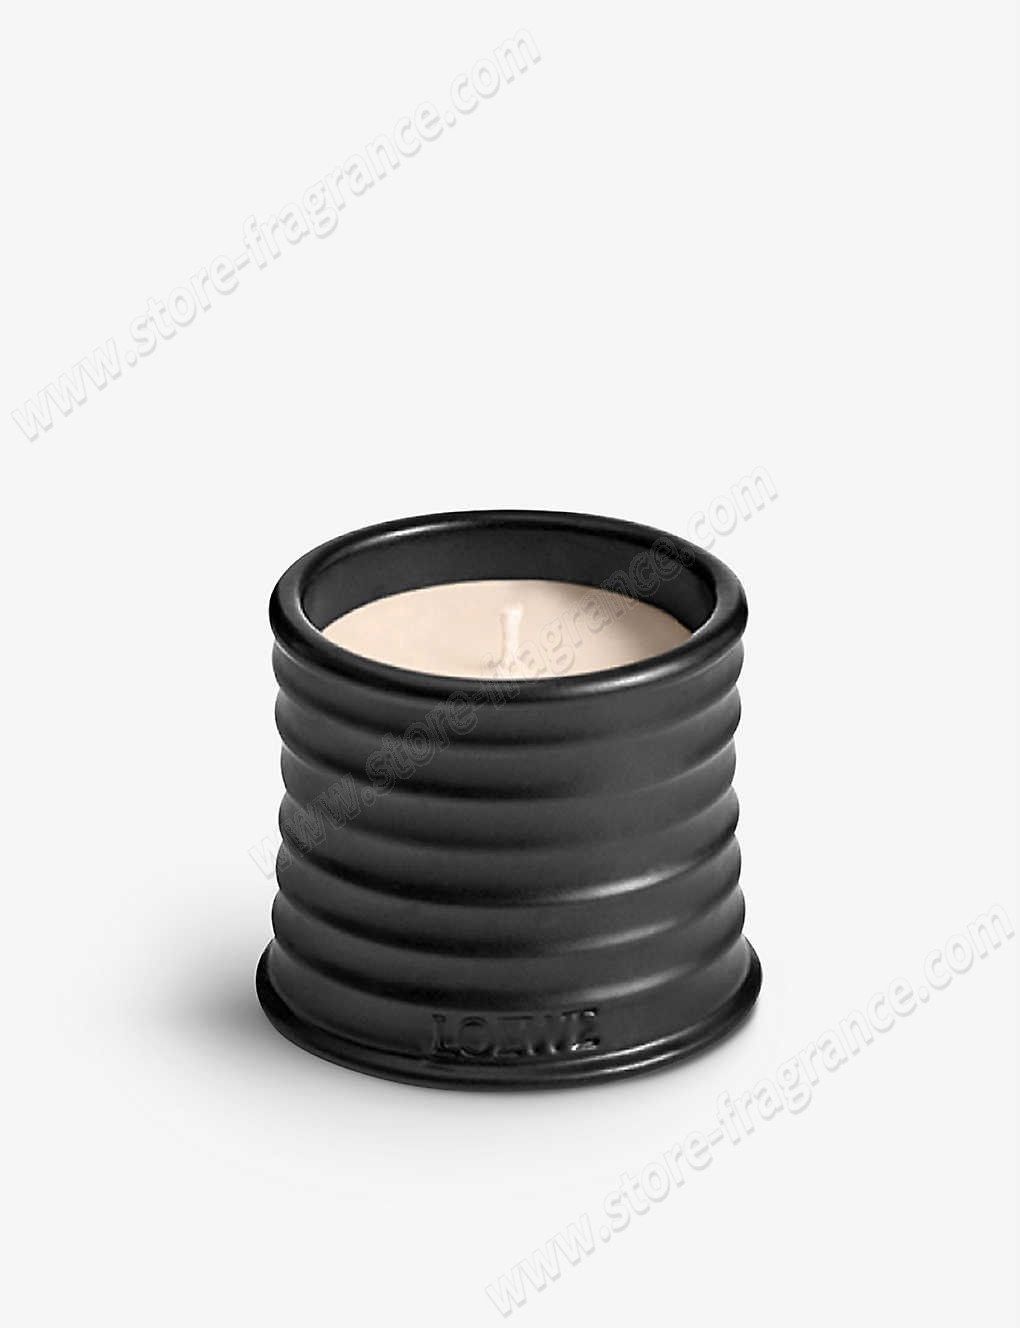 LOEWE/Liquorice small scented candle 170g ✿ Discount Store - LOEWE/Liquorice small scented candle 170g ✿ Discount Store